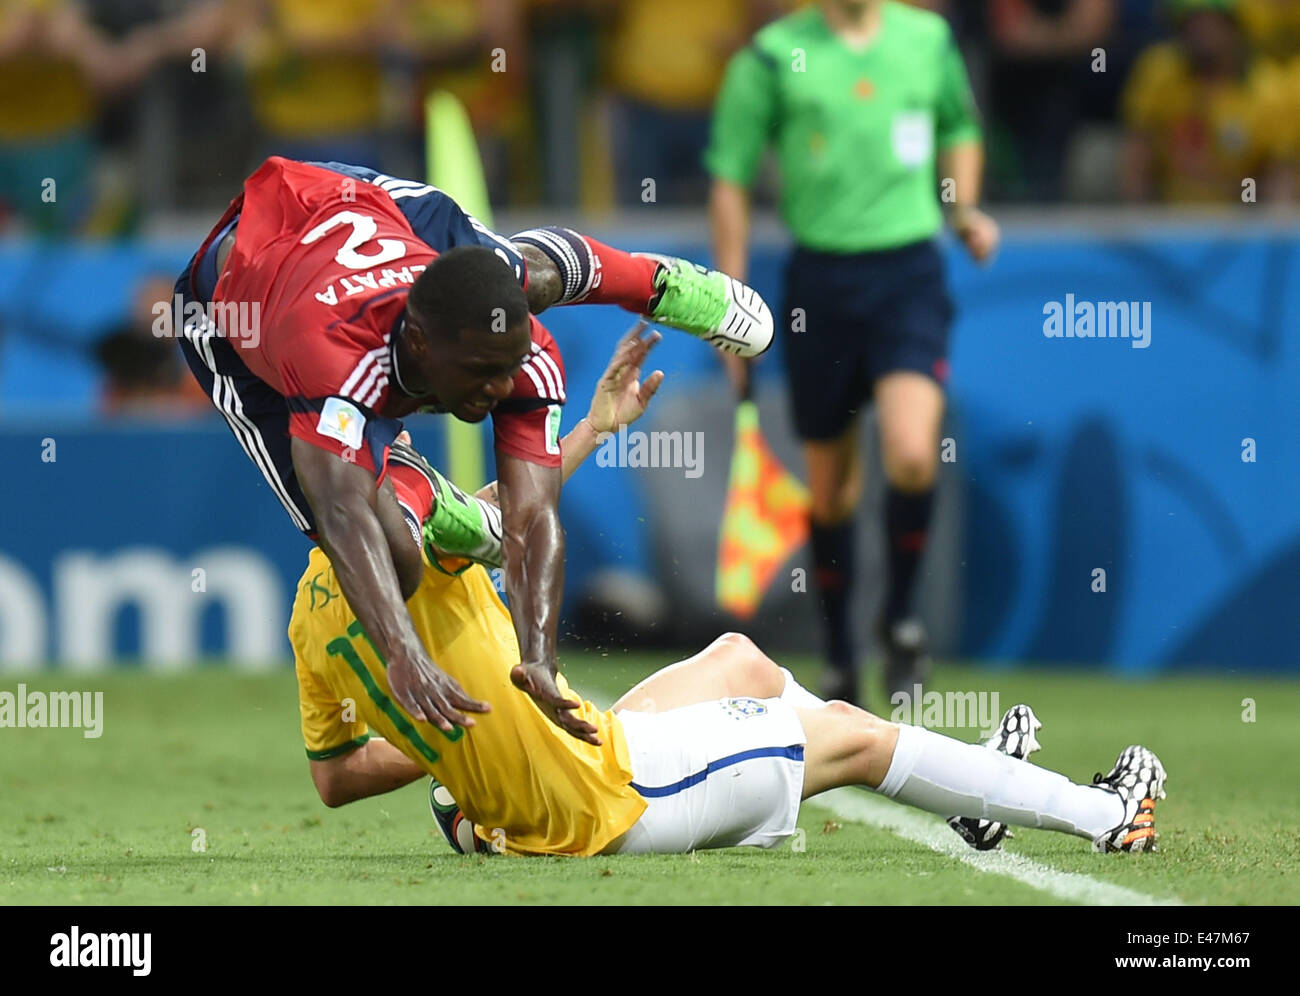 Fortaleza, Brazil. 4th July, 2014. Colombia's Cristian Zapata (front) falls down in a competition with Brazil's Oscar during a quarter-finals match between Brazil and Colombia of 2014 FIFA World Cup at the Estadio Castelao Stadium in Fortaleza, Brazil, on July 4, 2014. Credit:  Li Ga/Xinhua/Alamy Live News Stock Photo